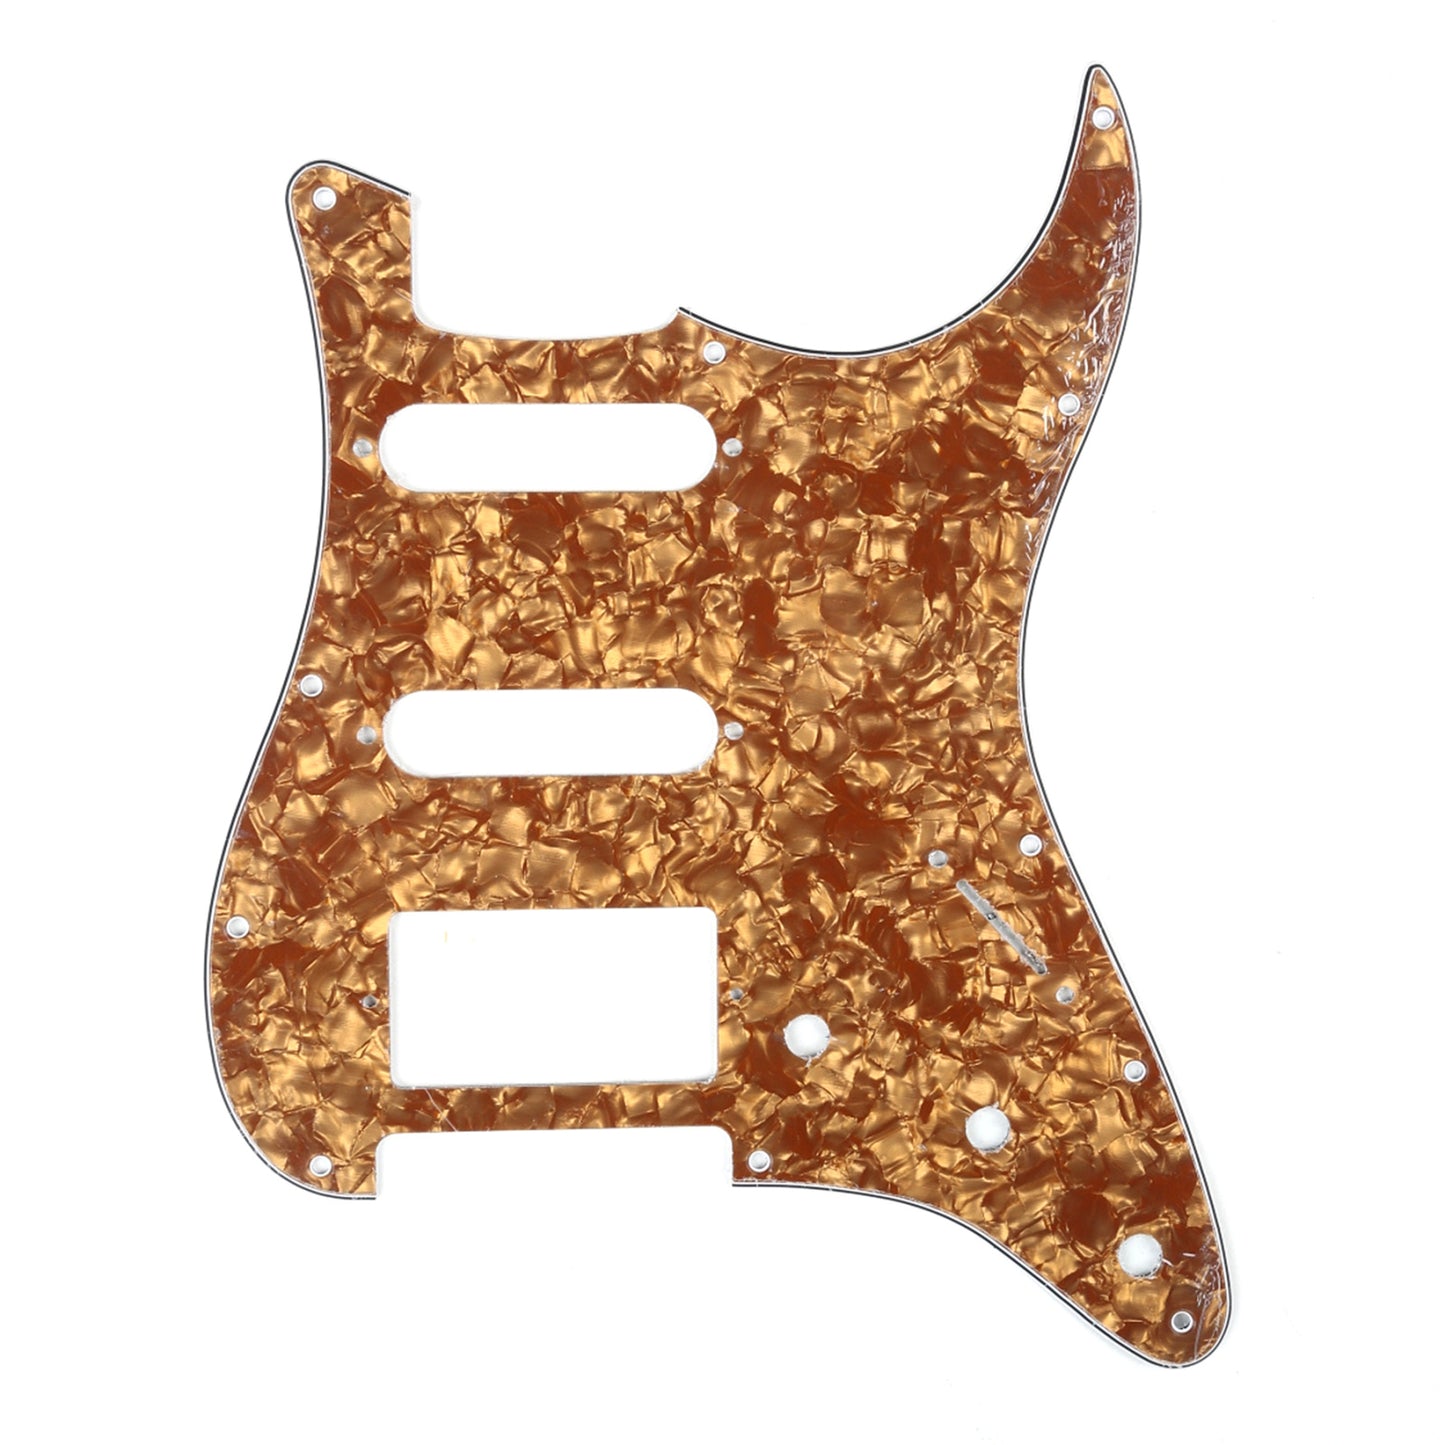 Musiclily HSS 11 Hole Guitar Strat Pickguard for Fender USA/Mexican Made Standard Stratocaster Modern Style, 4Ply Bronze Pearl